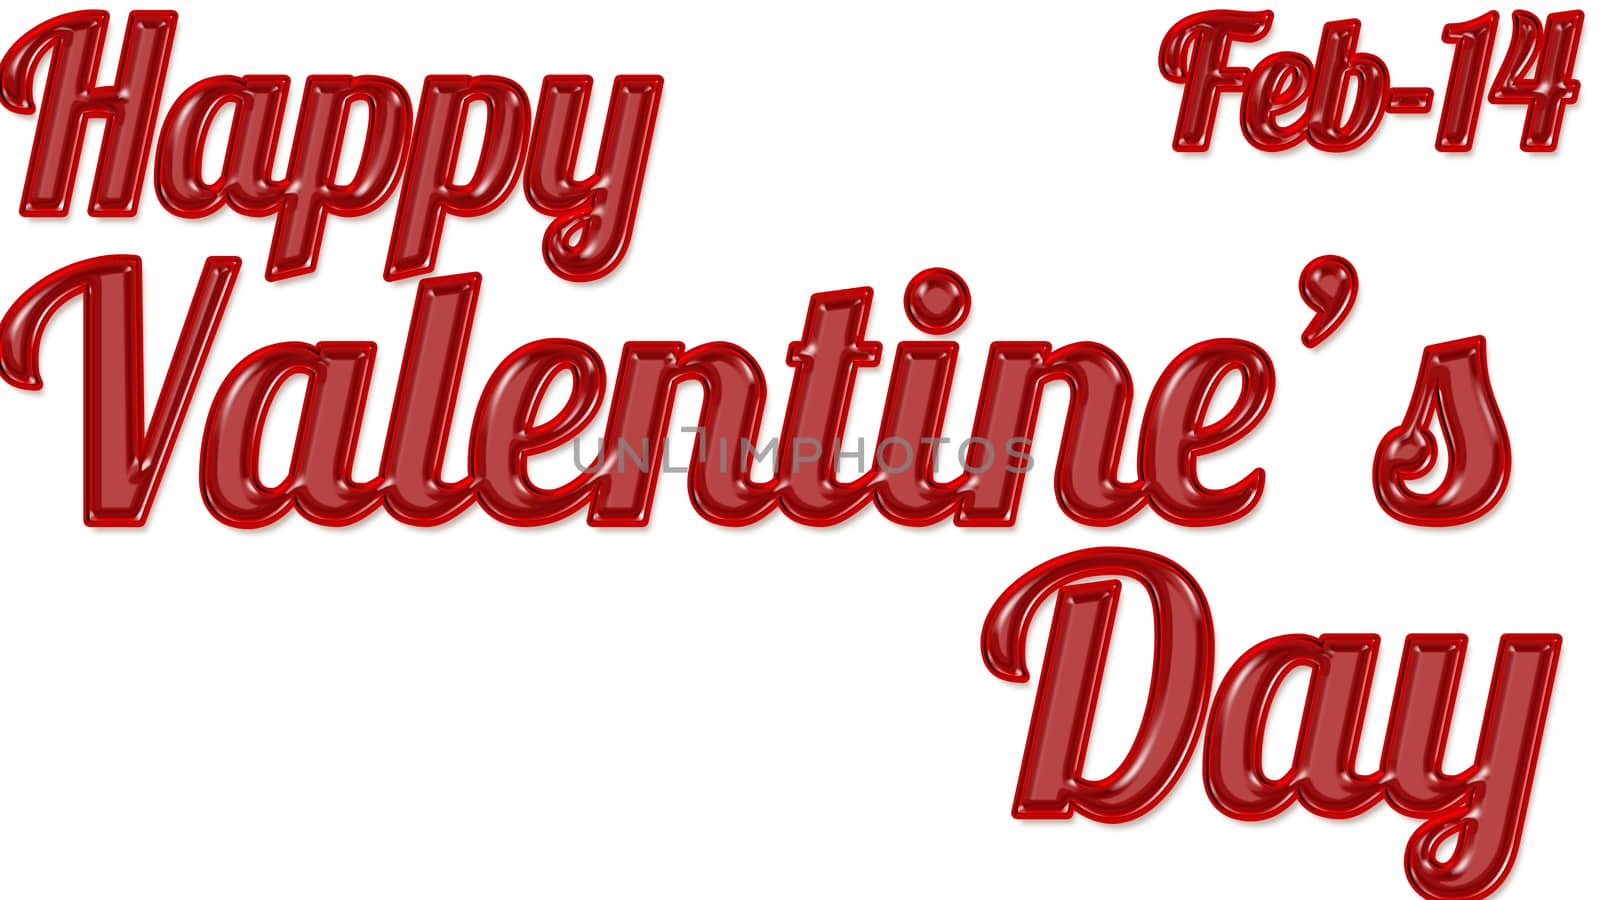 Happy Valentines Day typography poster with lovely calligraphy text, isolated on white background.